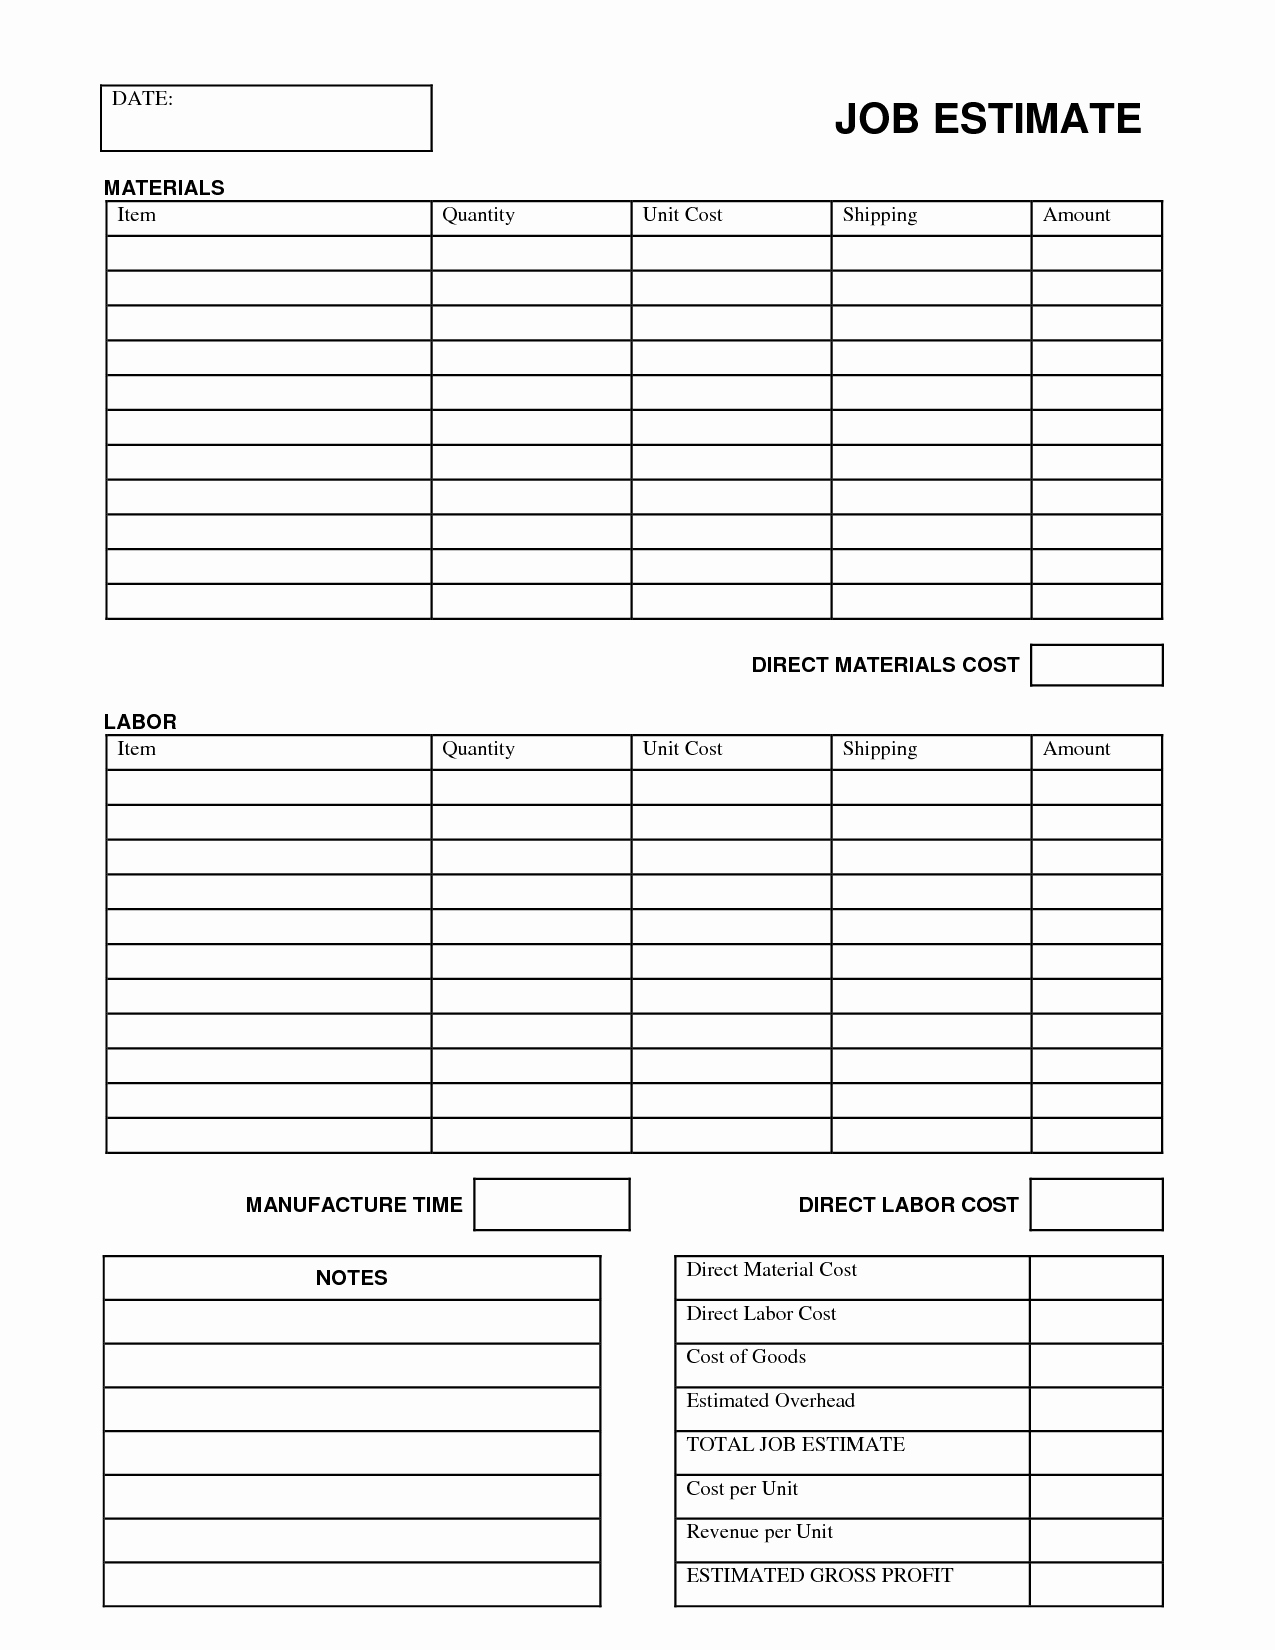 Free Proposal form Template Awesome Printable Job Estimate forms